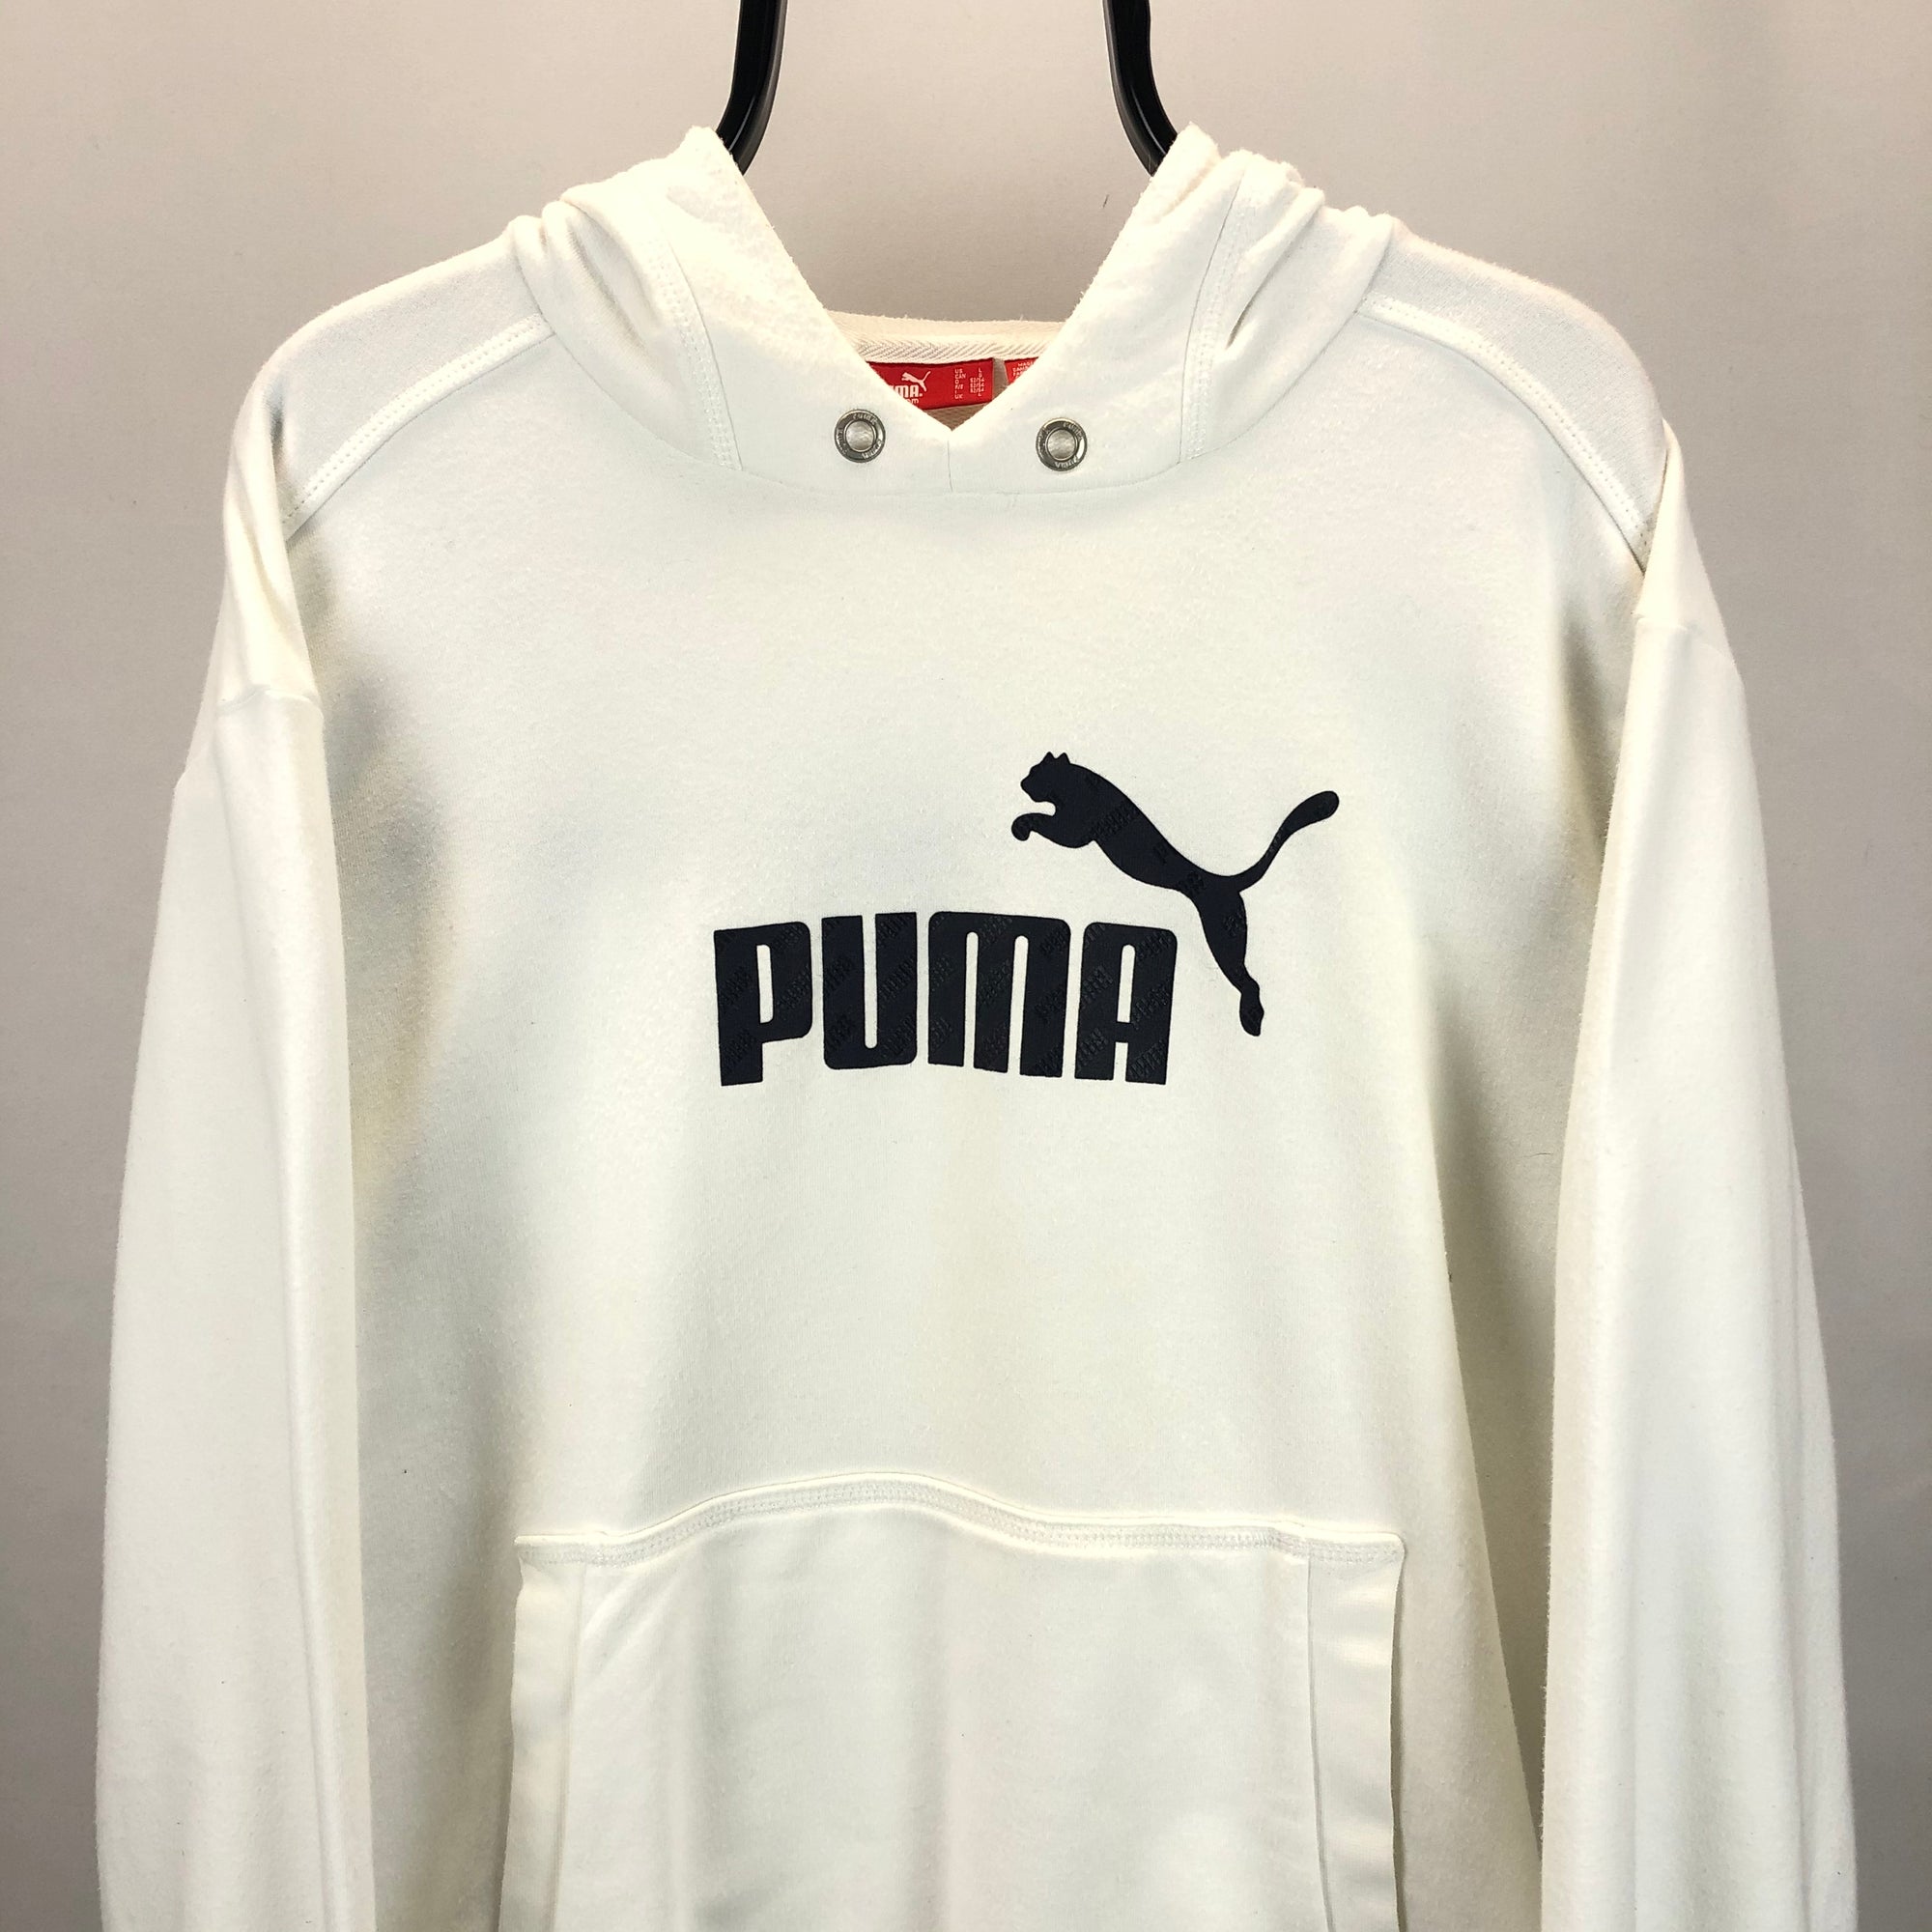 Puma Spellout Hoodie in White - Men's Large/Women's XL